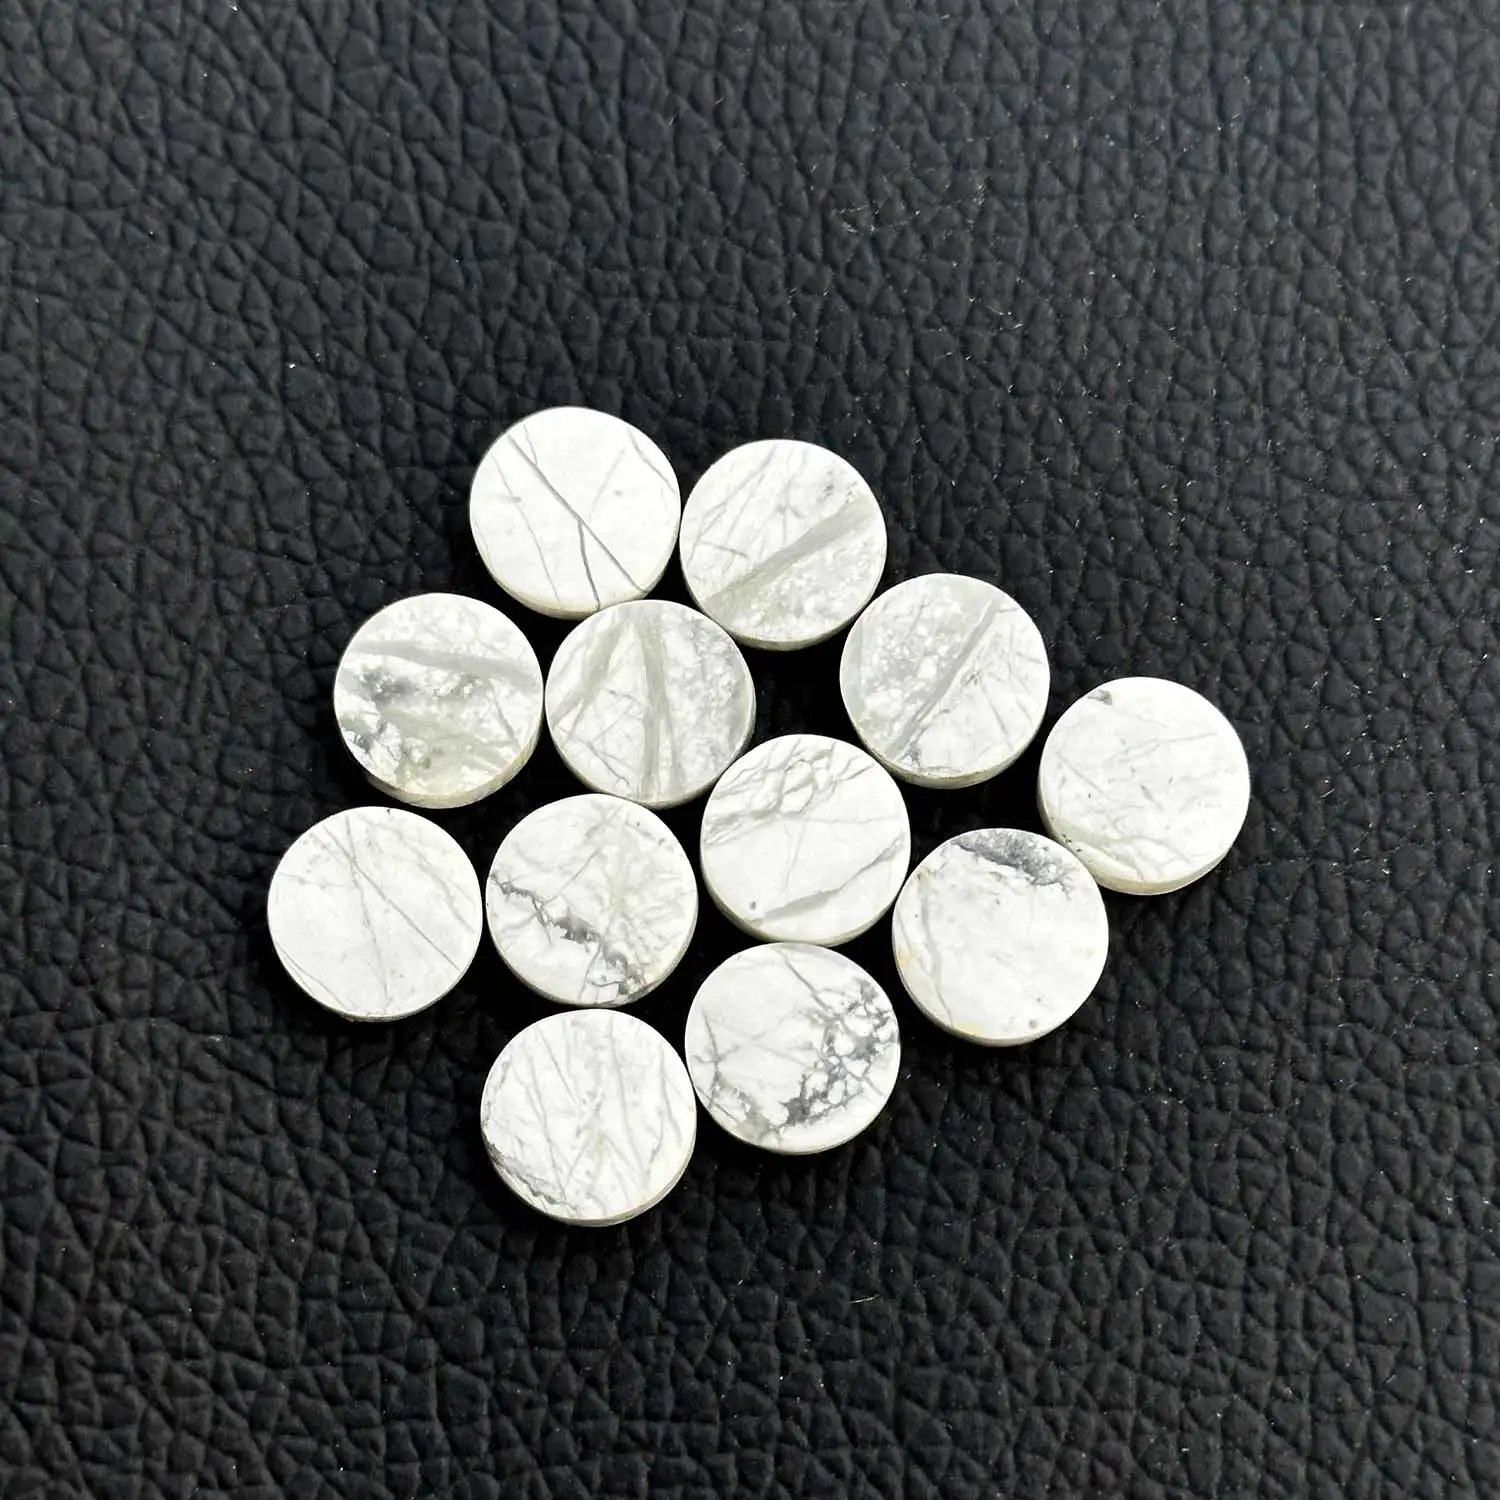 Verified Regular Supplier 100% Natural White Howlite Flat Round Coin Gemstone Loose Stones 10mm Custom Size Available